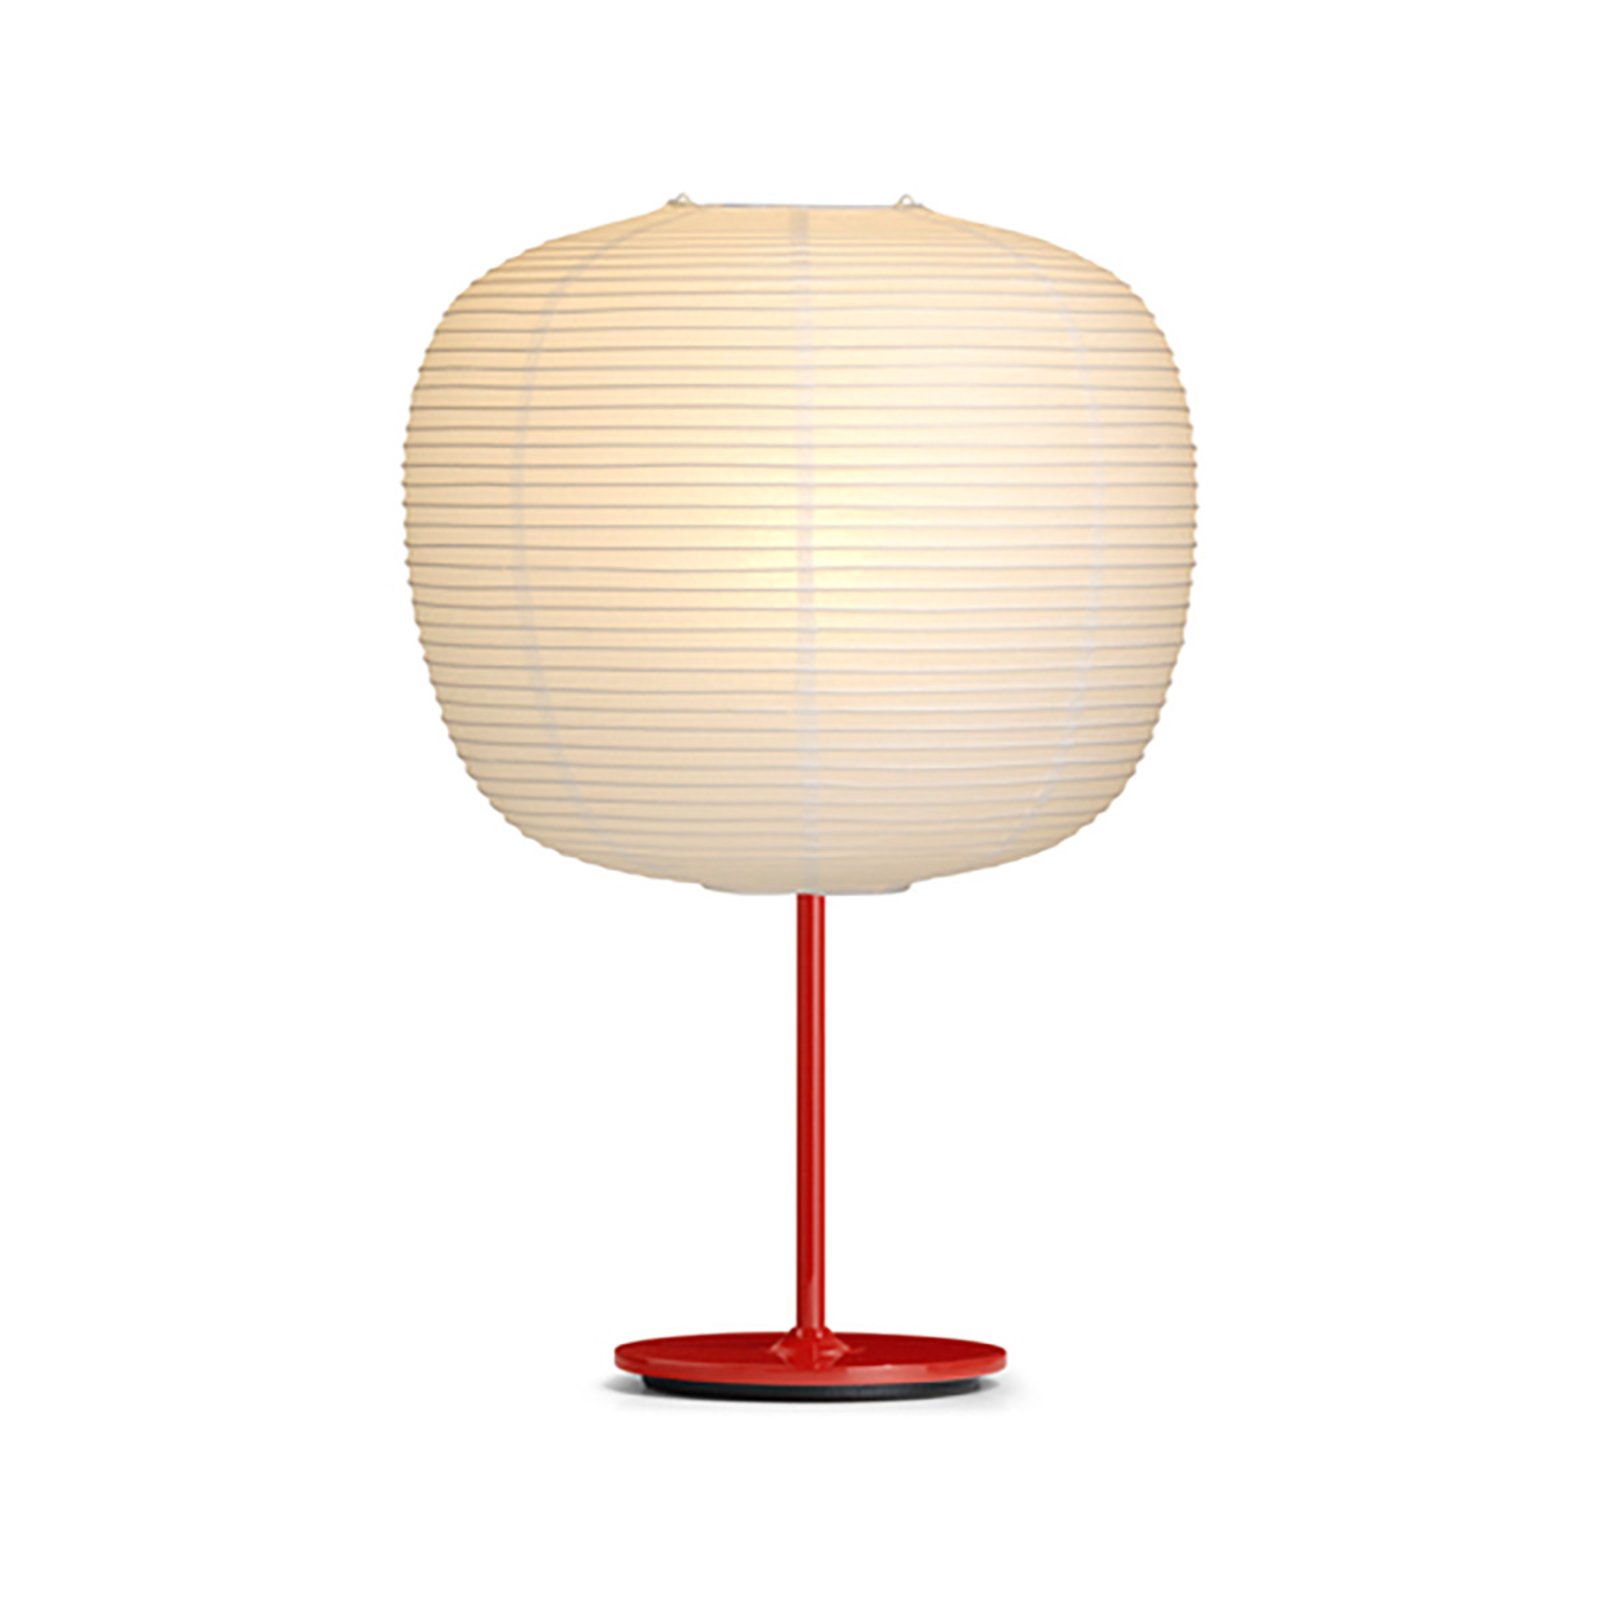 HAY Common Table, Peach lampshade, signal red base